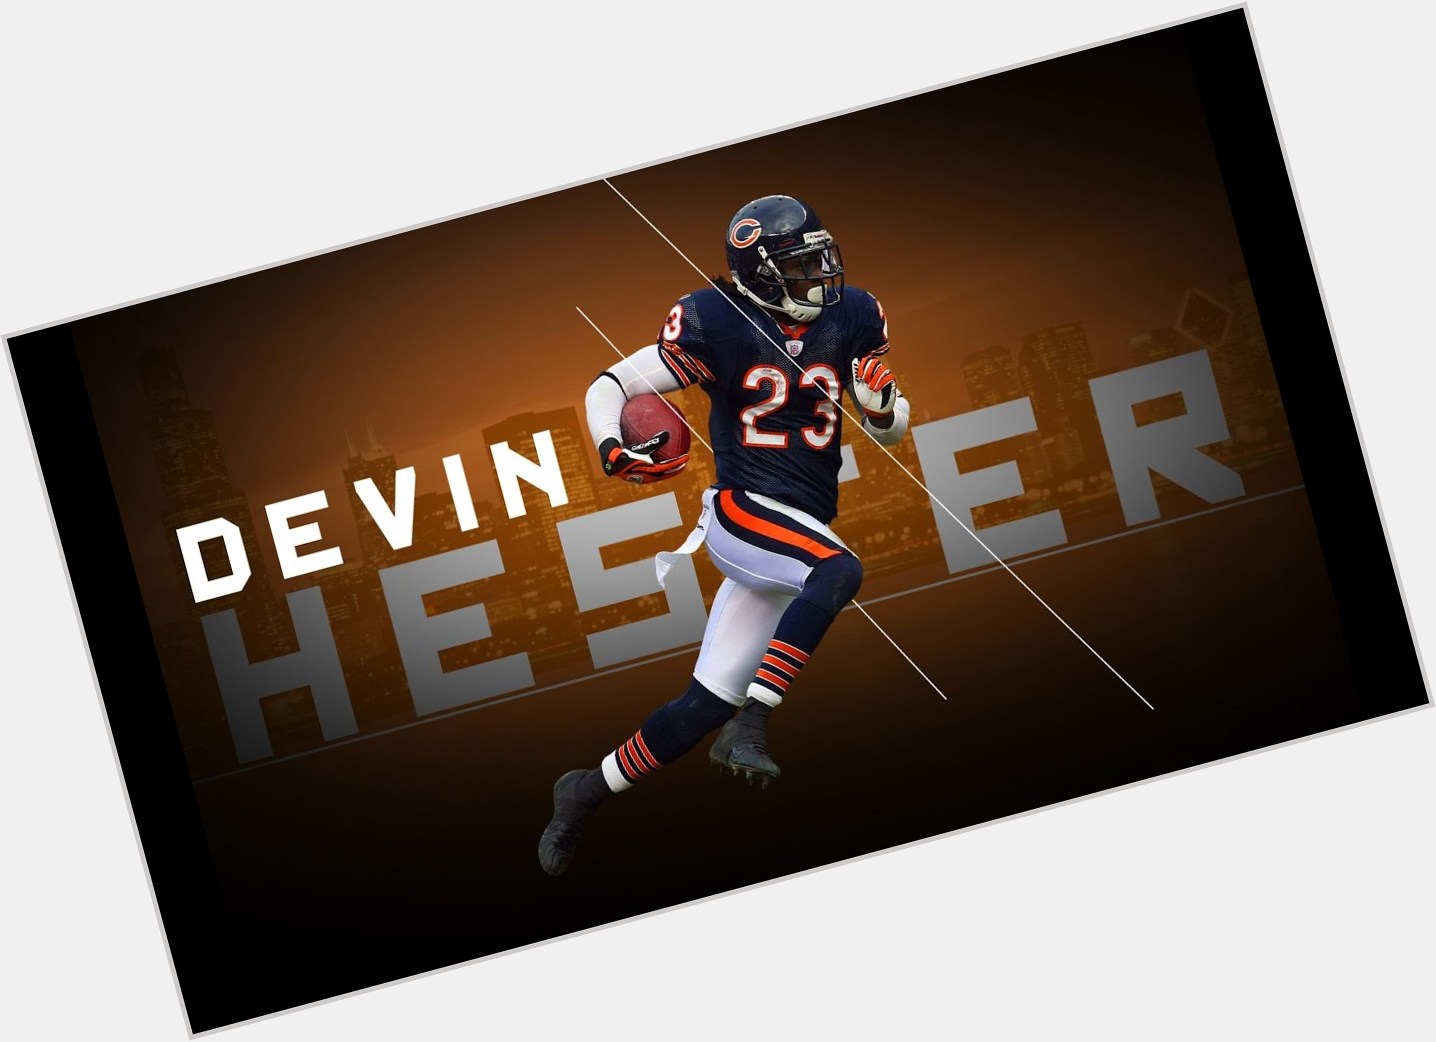 Http://fanpagepress.net/m/D/Devin Hester New Pic 2